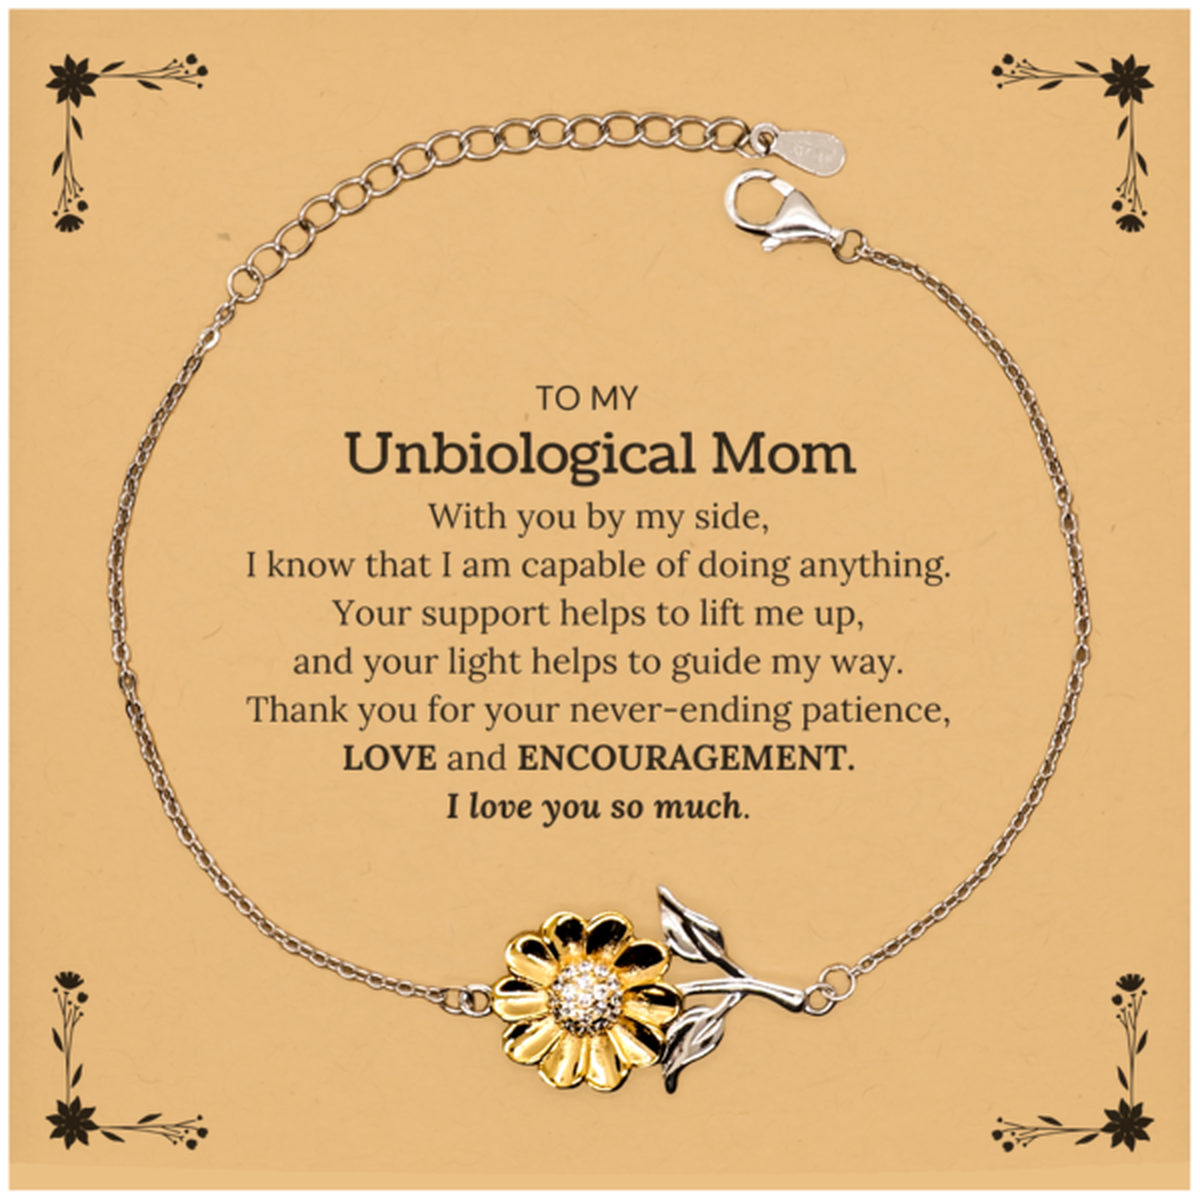 Appreciation Unbiological Mom Sunflower Bracelet Gifts, To My Unbiological Mom Birthday Christmas Wedding Keepsake Gifts for Unbiological Mom With you by my side, I know that I am capable of doing anything. I love you so much